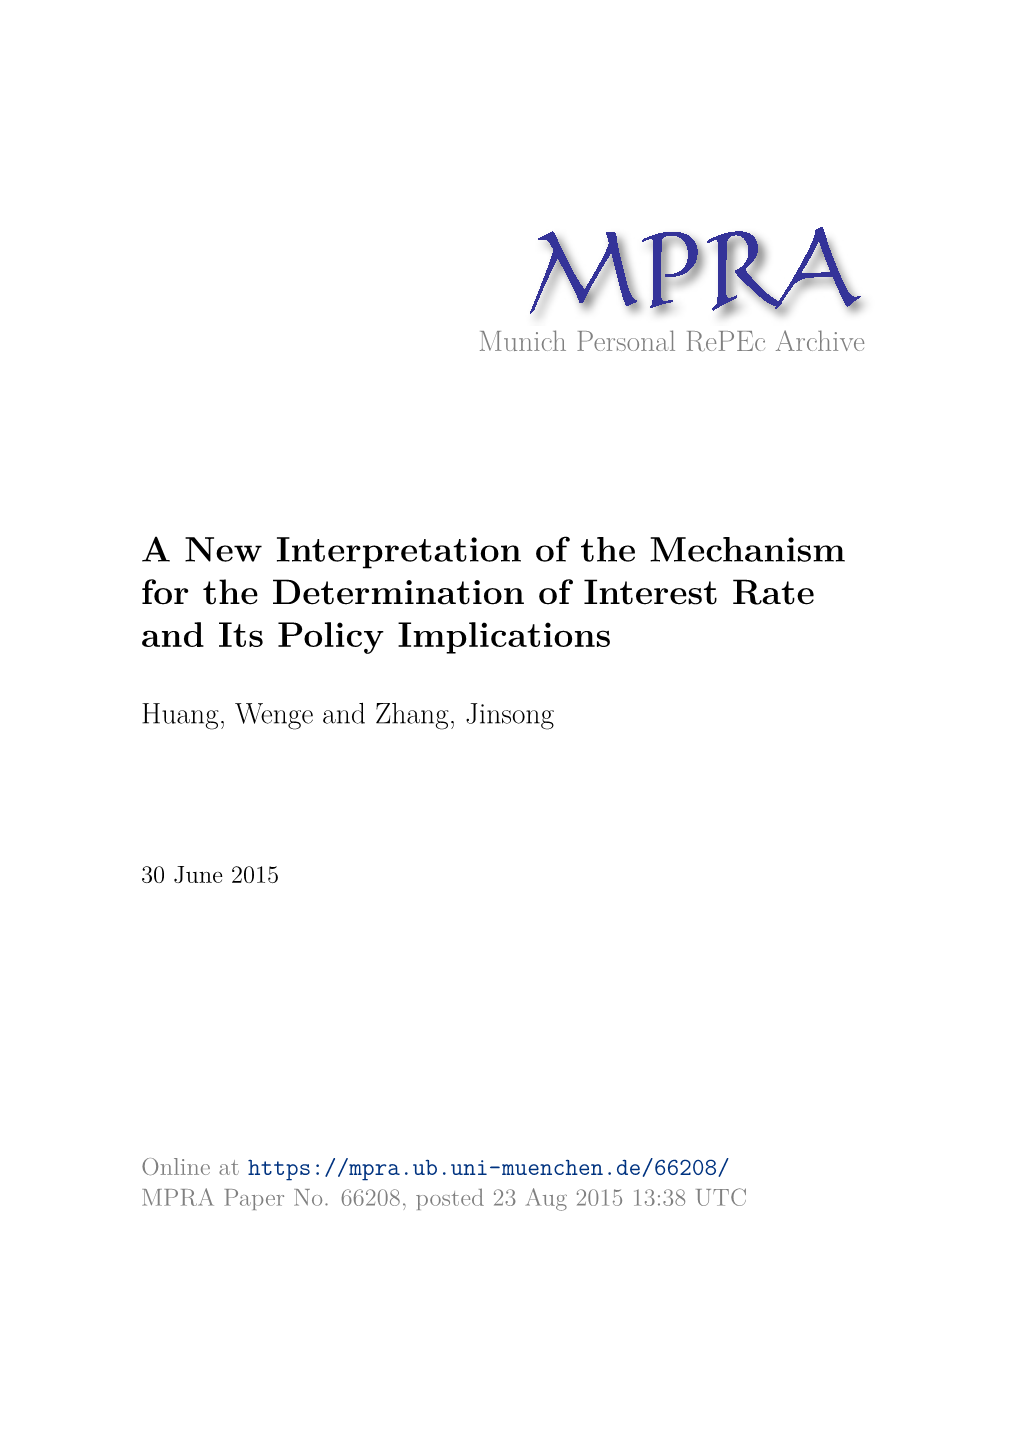 A New Interpretation of the Mechanism for the Determination of Interest Rate and Its Policy Implications